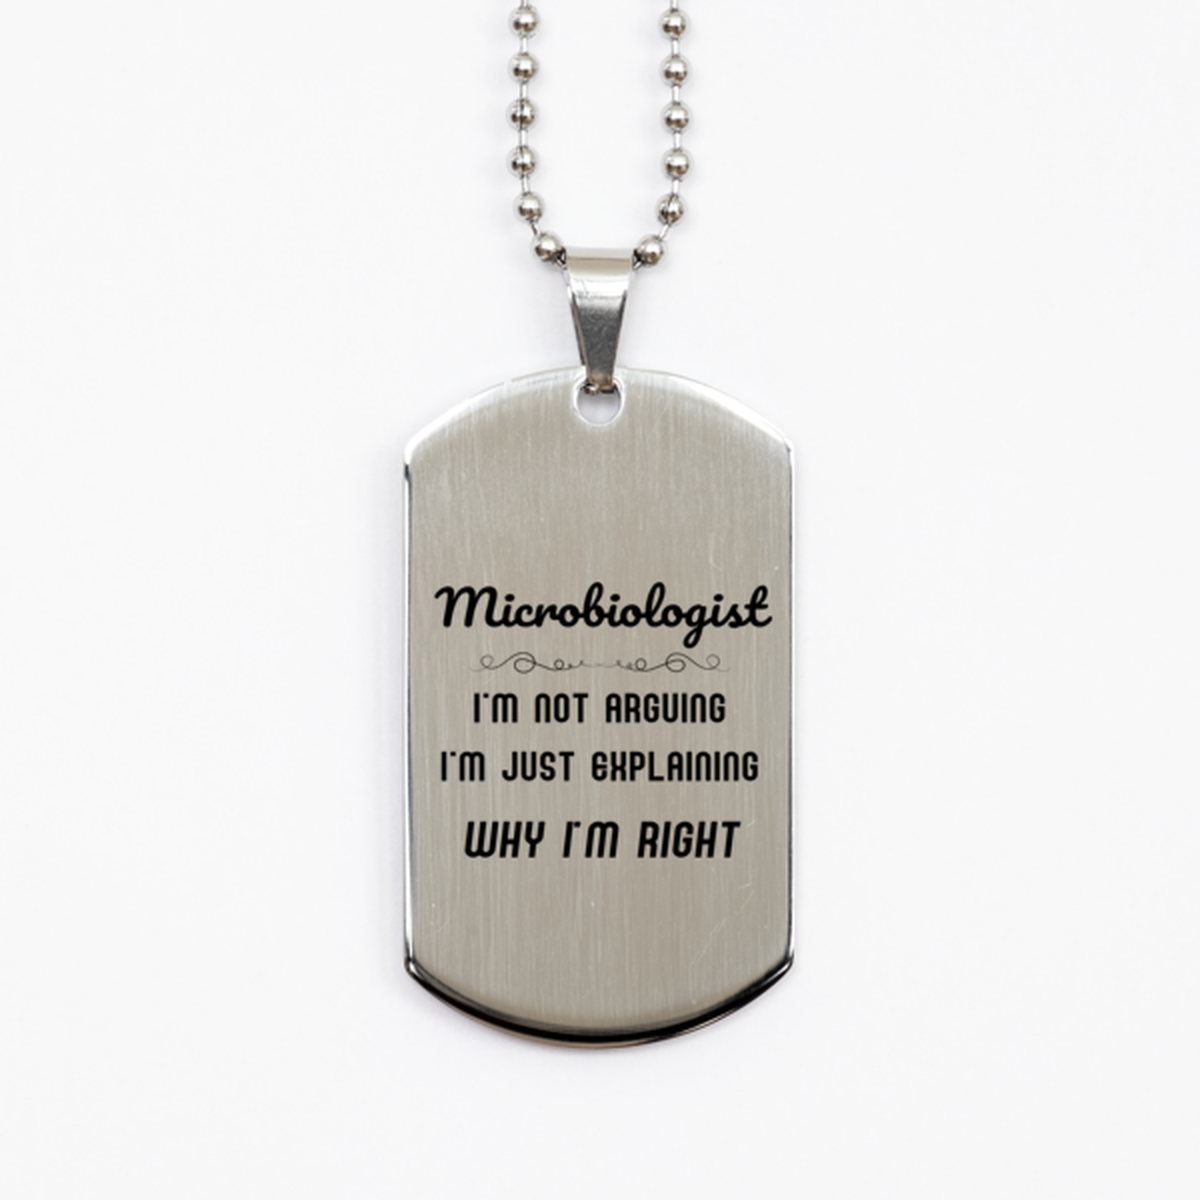 Microbiologist I'm not Arguing. I'm Just Explaining Why I'm RIGHT Silver Dog Tag, Funny Saying Quote Microbiologist Gifts For Microbiologist Graduation Birthday Christmas Gifts for Men Women Coworker